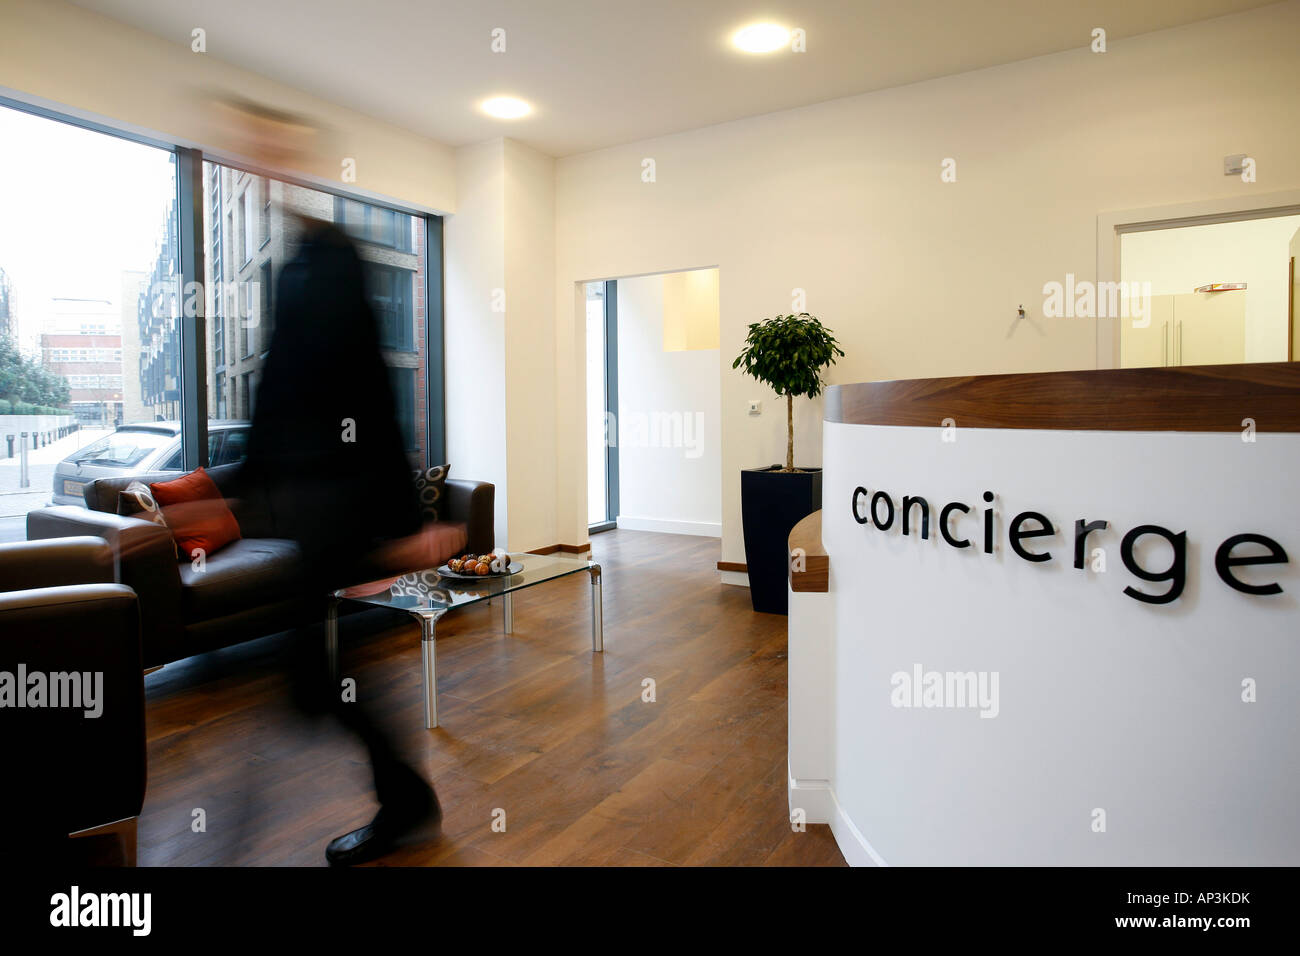 A Concierge Desk In An Apartment And Hotel Block Stock Photo